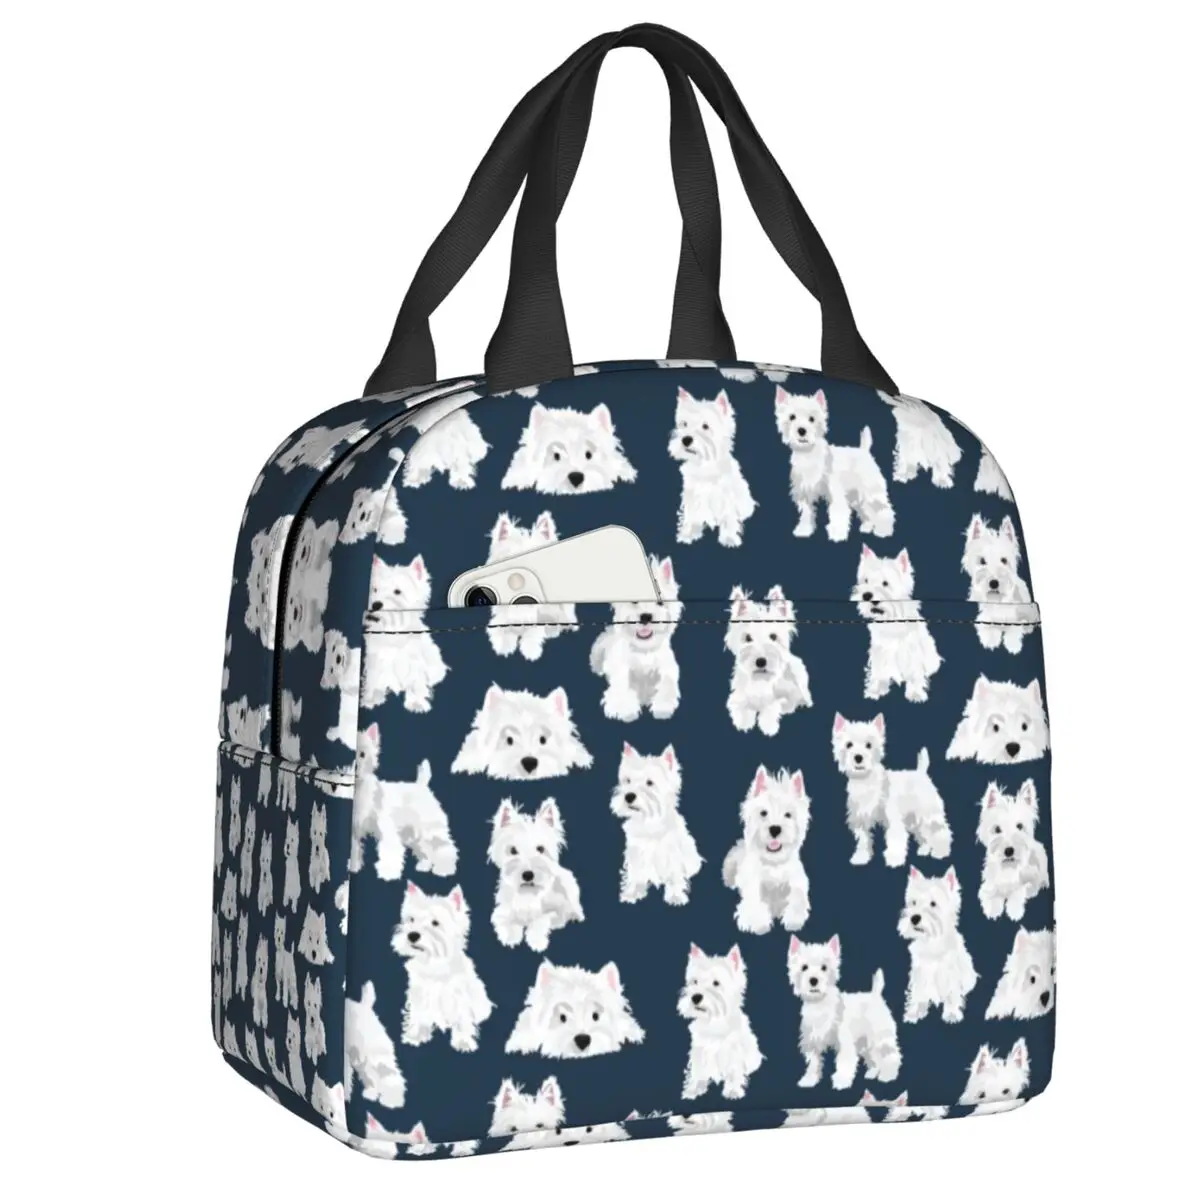 

West Highland White Terrier Dog Insulated Lunch Bag for Women Portable Westie Puppy Thermal Cooler Lunch Box Office Work School